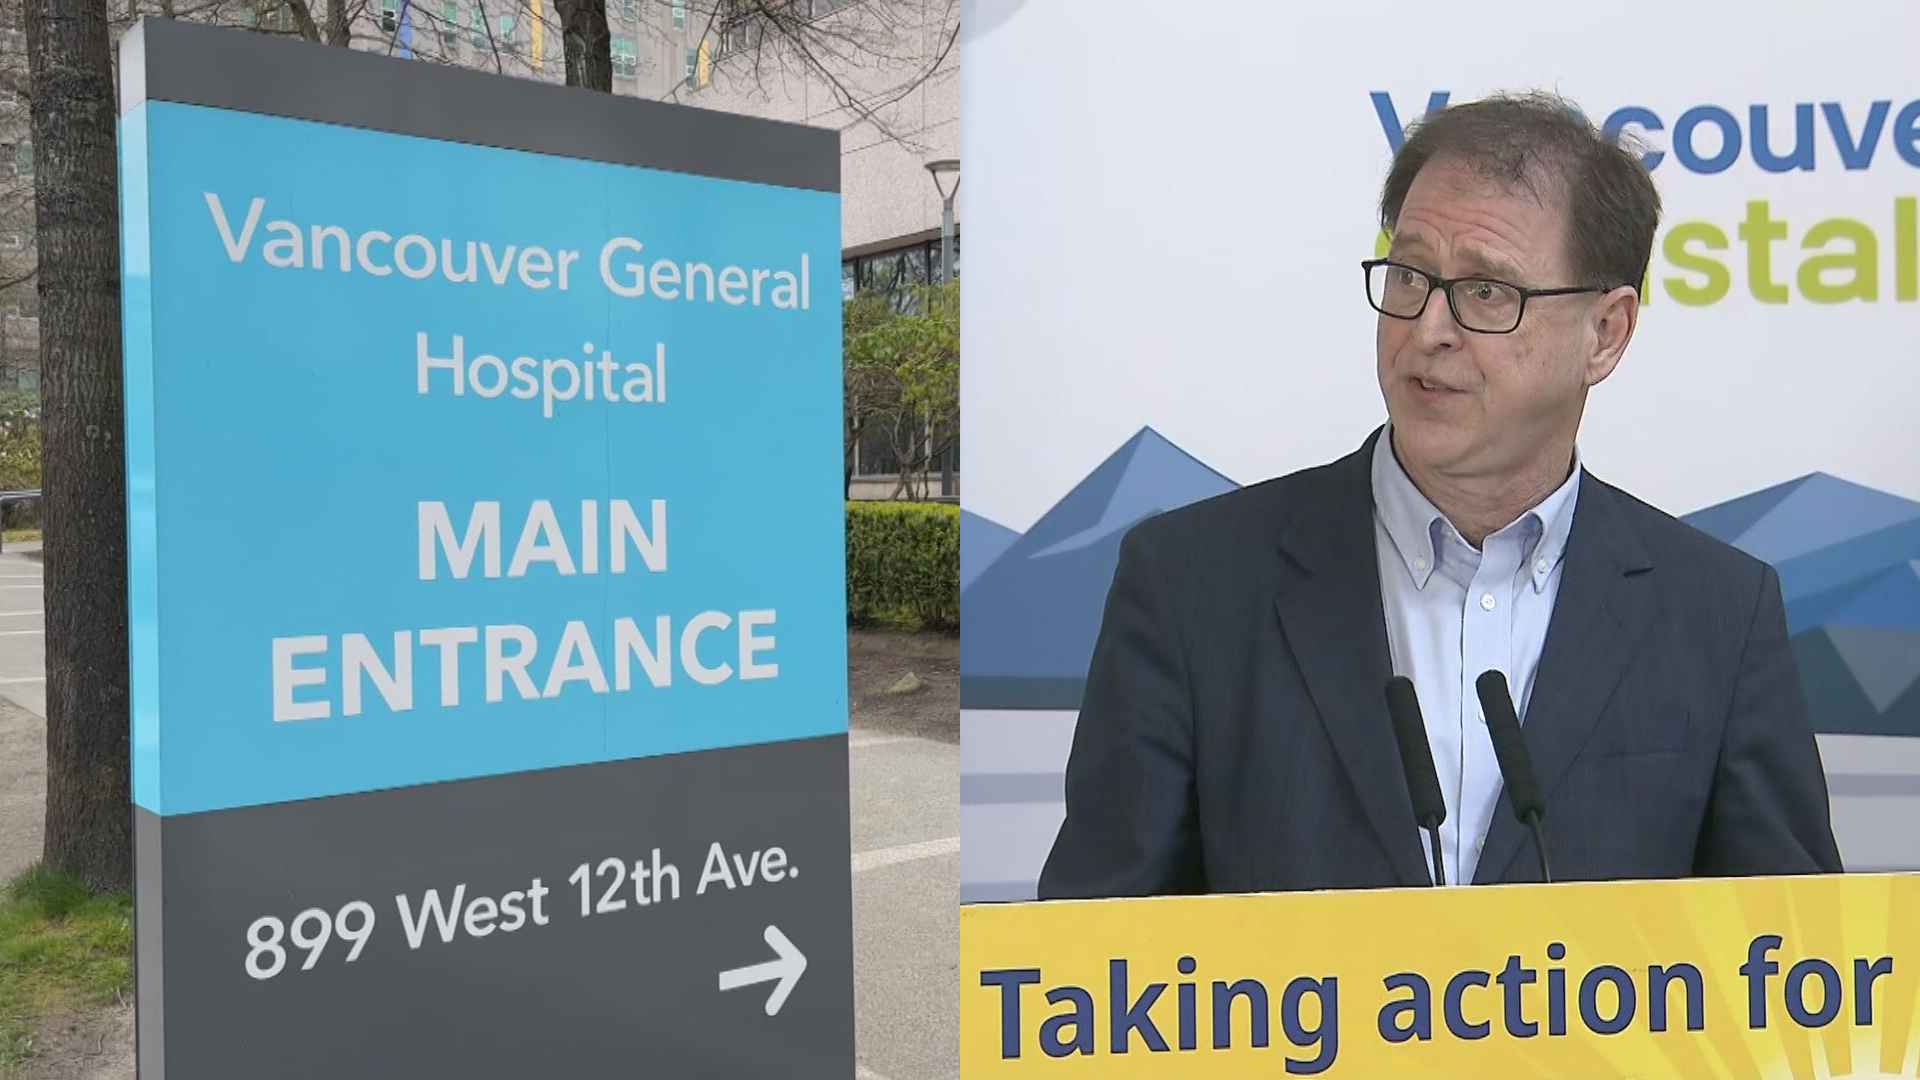 Debate ongoing over drug use spaces in B.C. hospitals